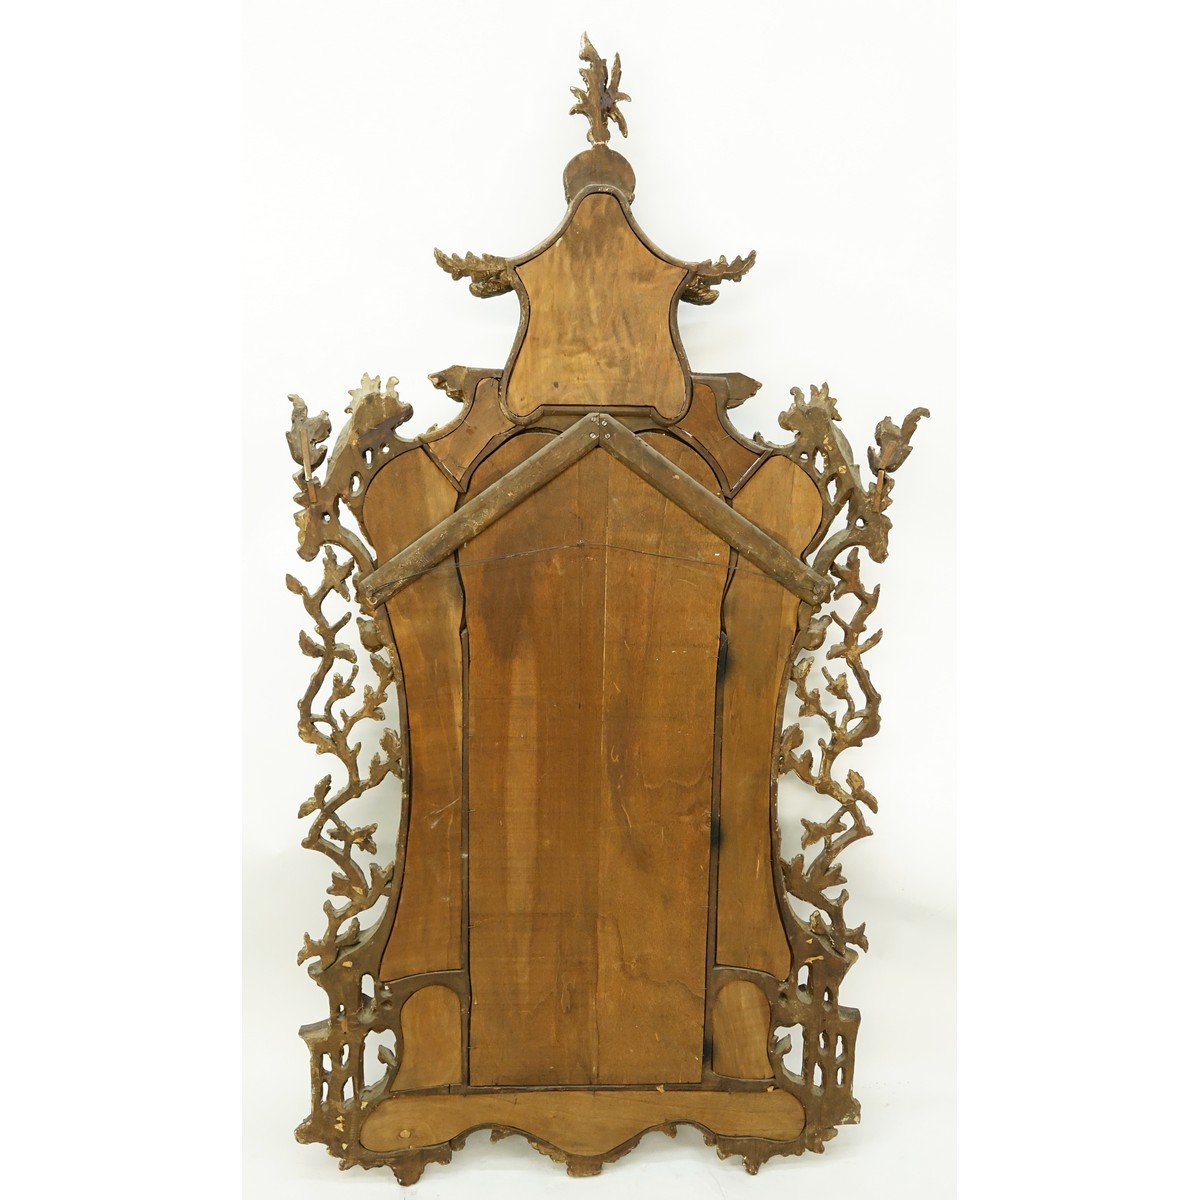 Impressive Large 19/20th Century Carved Wood Chinoiserie Pagoda Mirror. With a seated figure in the pagoda, squirrels, architectural and ornate foliate elements.